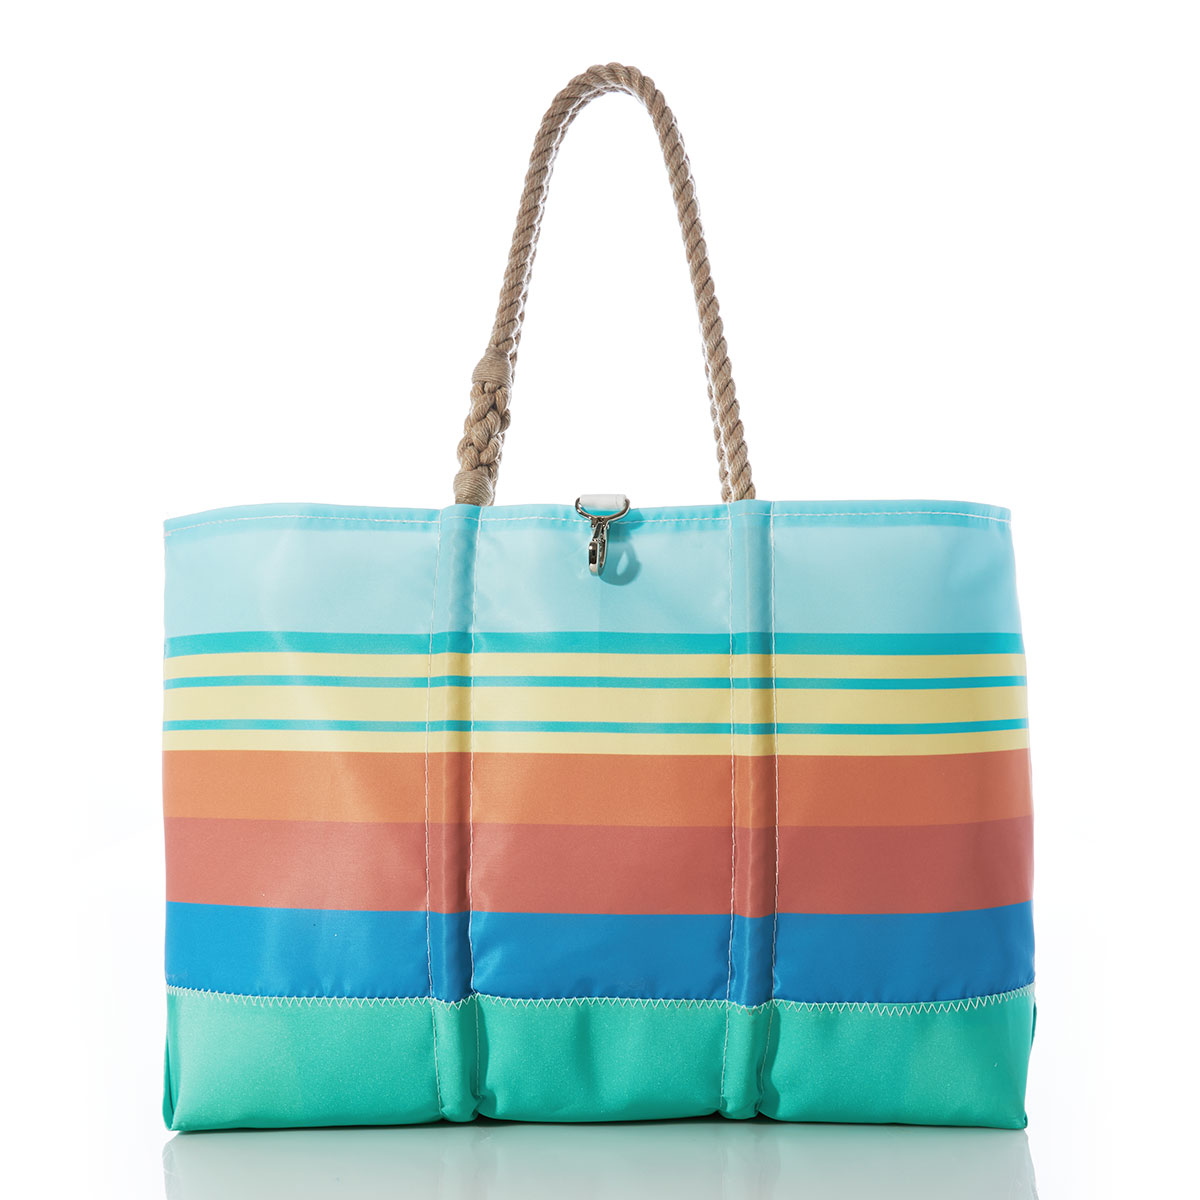 stripes in blue orange yellow and aquamarine printed on a recycled sail cloth beach tote with hemp rope handles